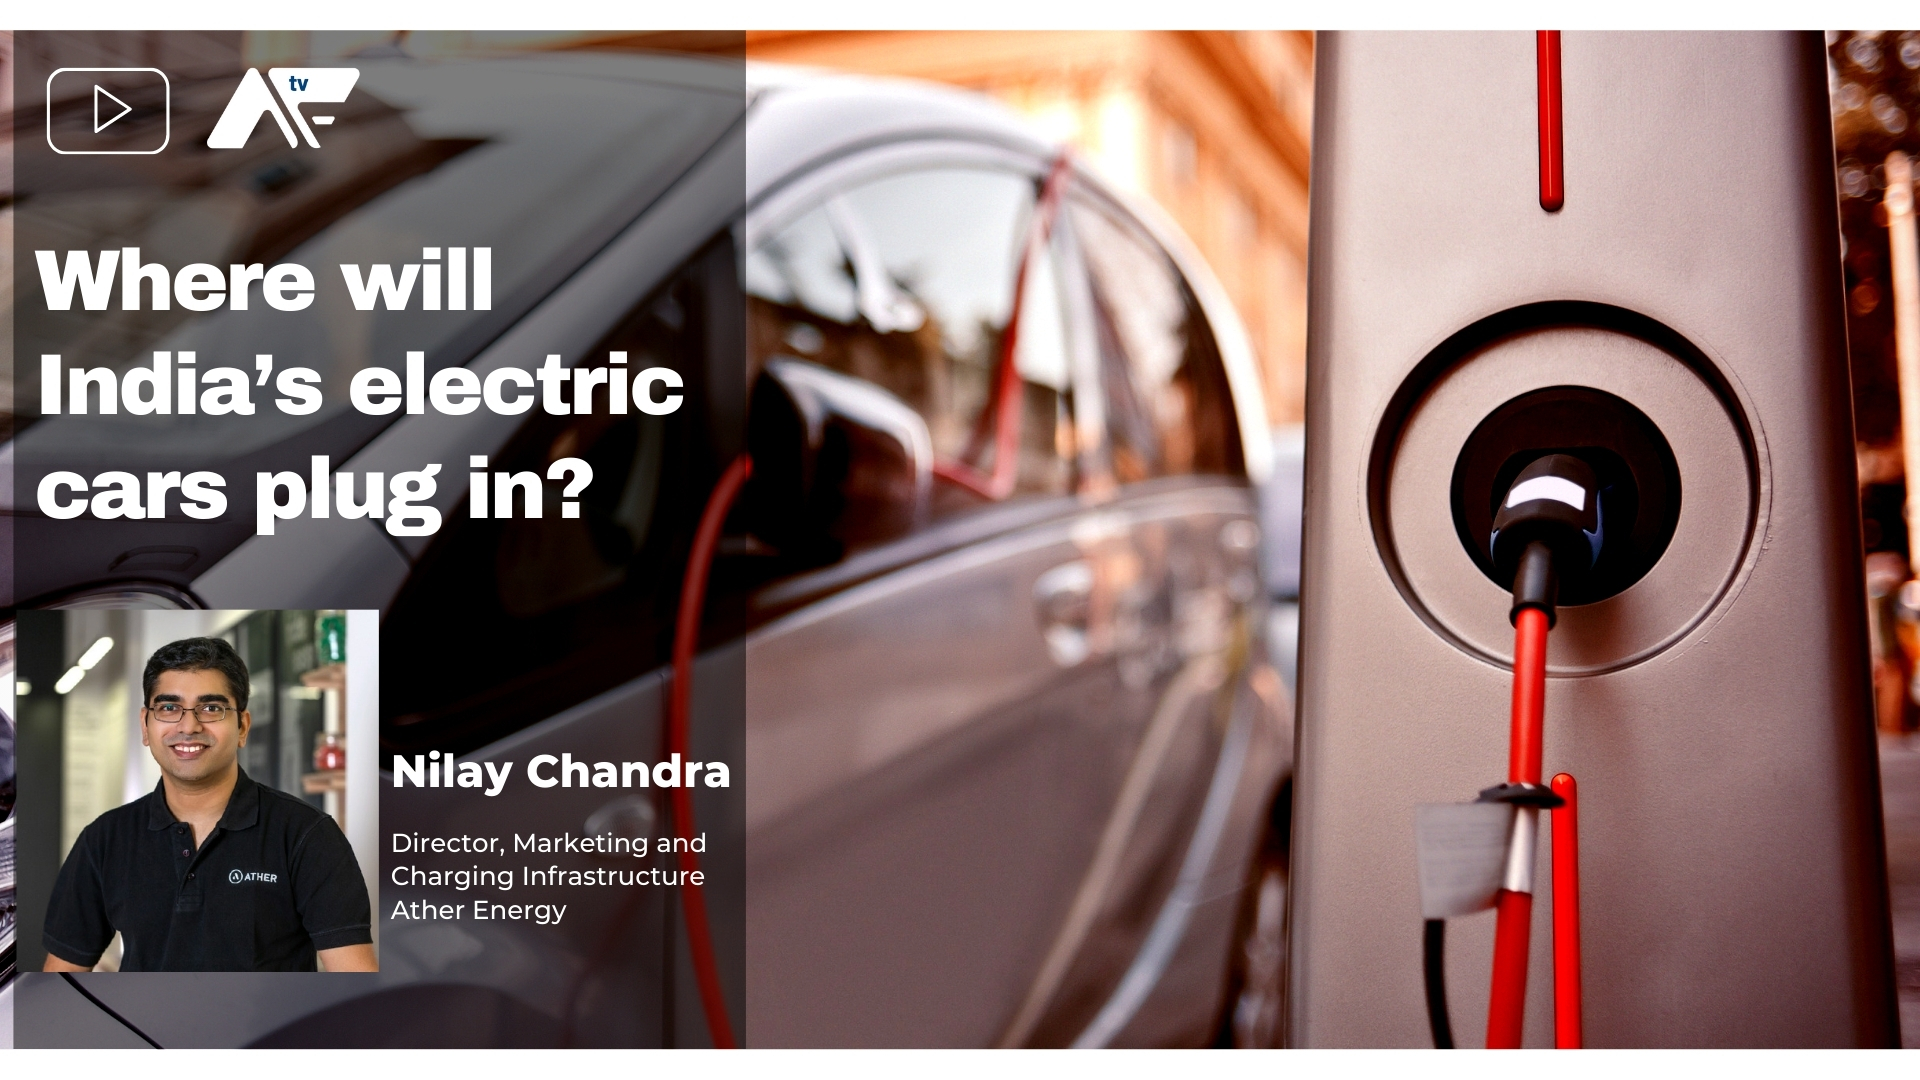 Where will India’s electric cars plug in?